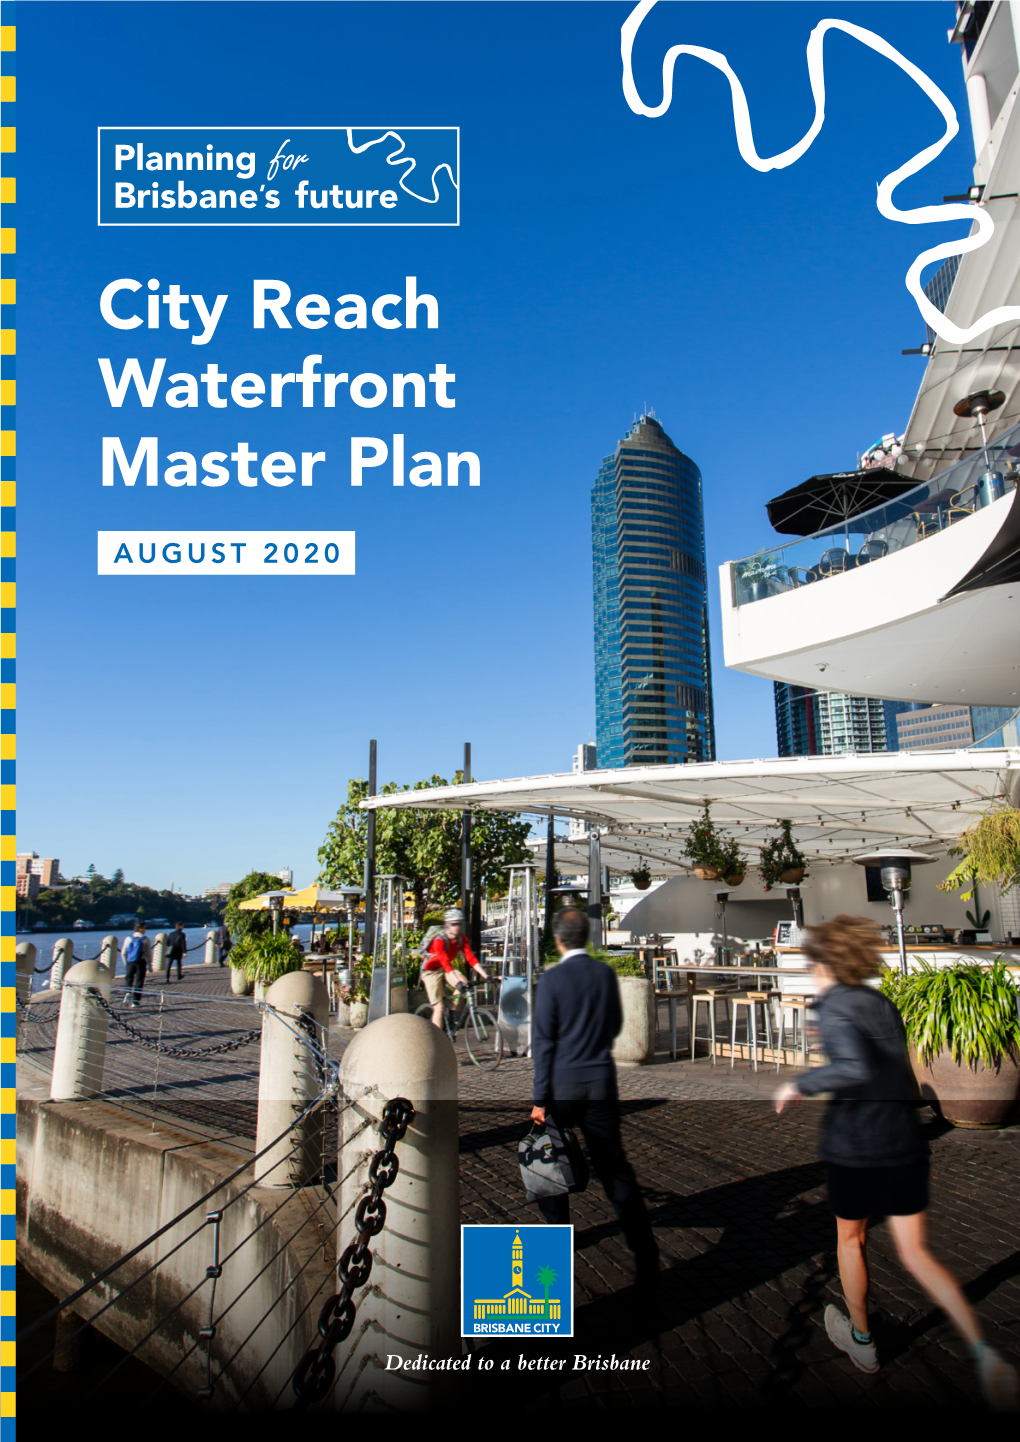 Download the City Reach Waterfront Masterplan